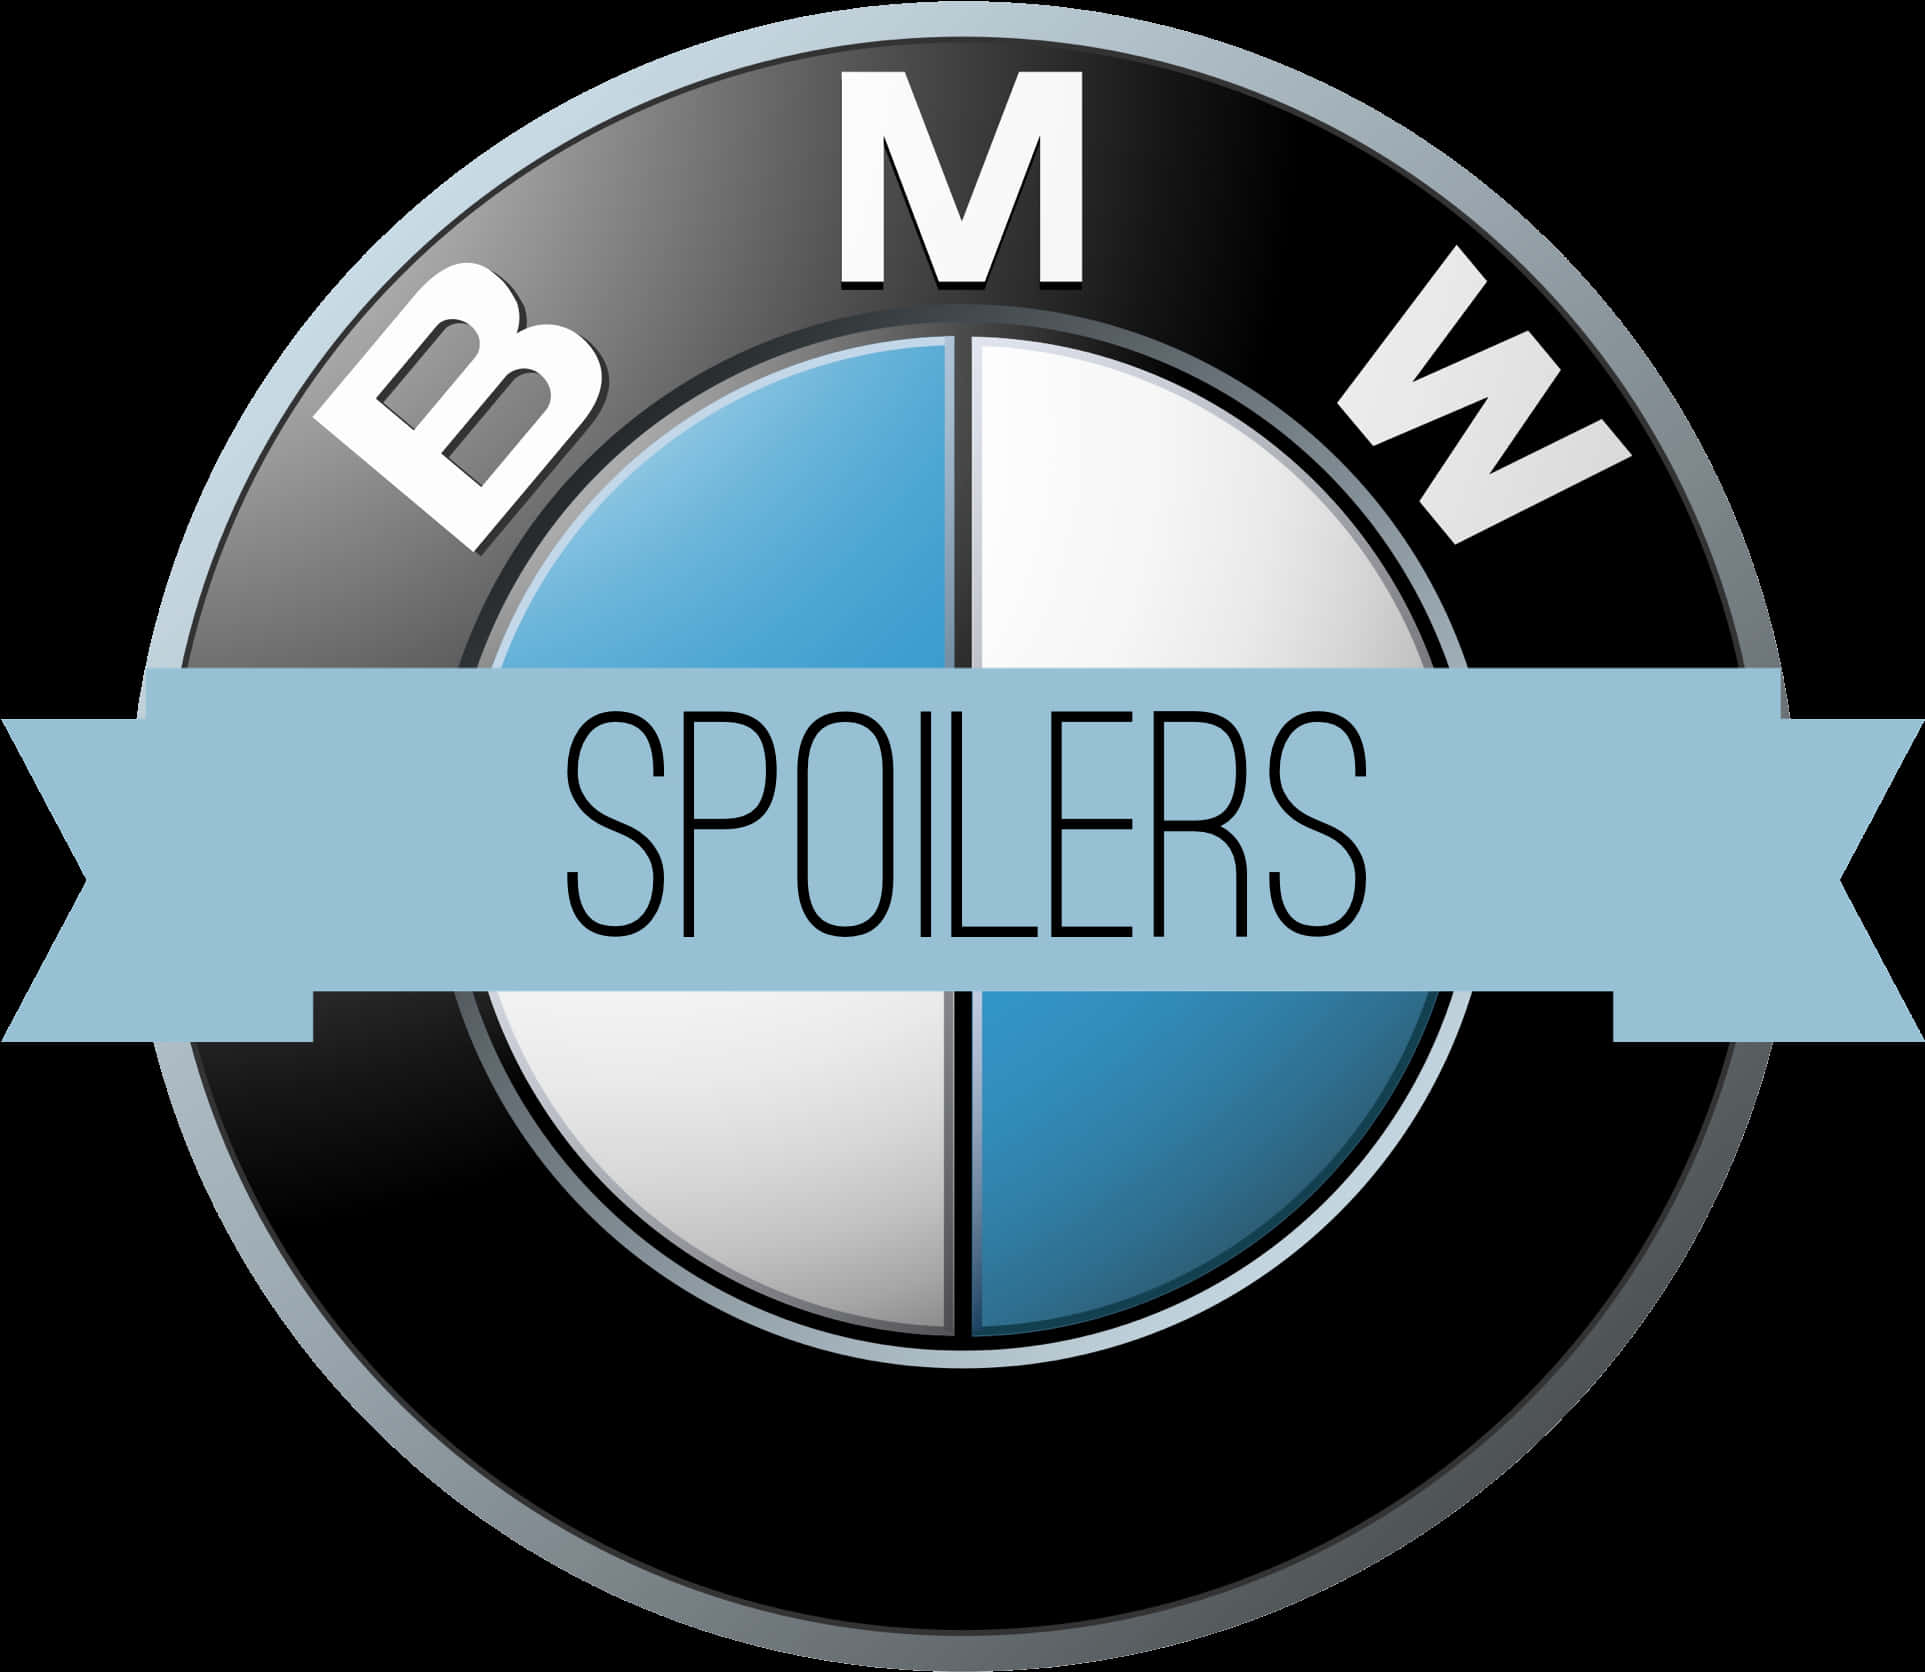 B M W Logowith Spoilers Banner PNG image